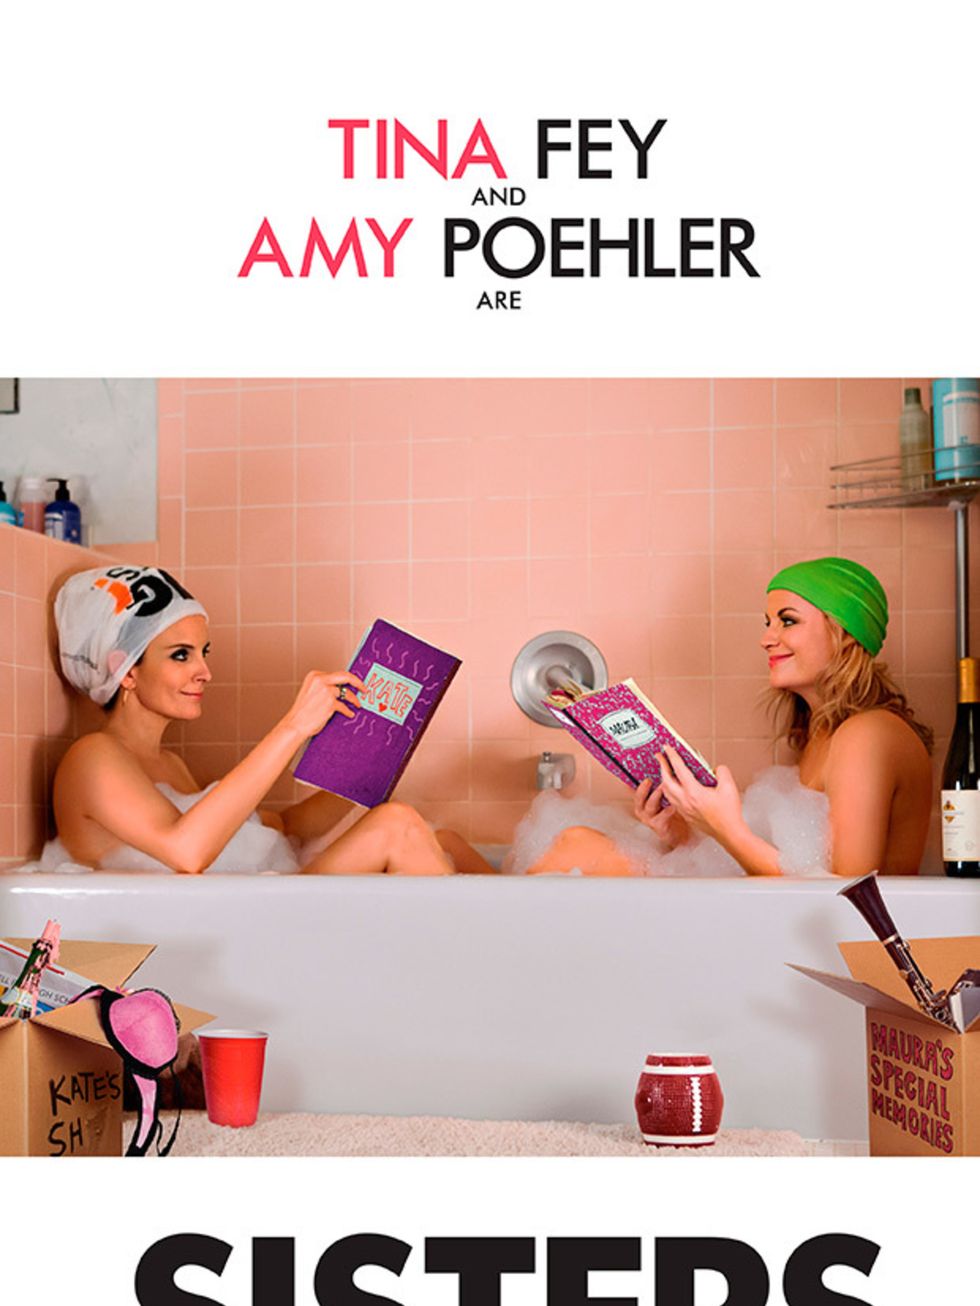 <p>FILM: Sisters</p>

<p>So apparently there&rsquo;s a pretty big sci-fi film coming out in a few days&rsquo; time. But who needs Luke Skywalker and Han Solo when you can have Tina Fey and Amy Poehler? And who wants to watch lightsabre battles when you ca